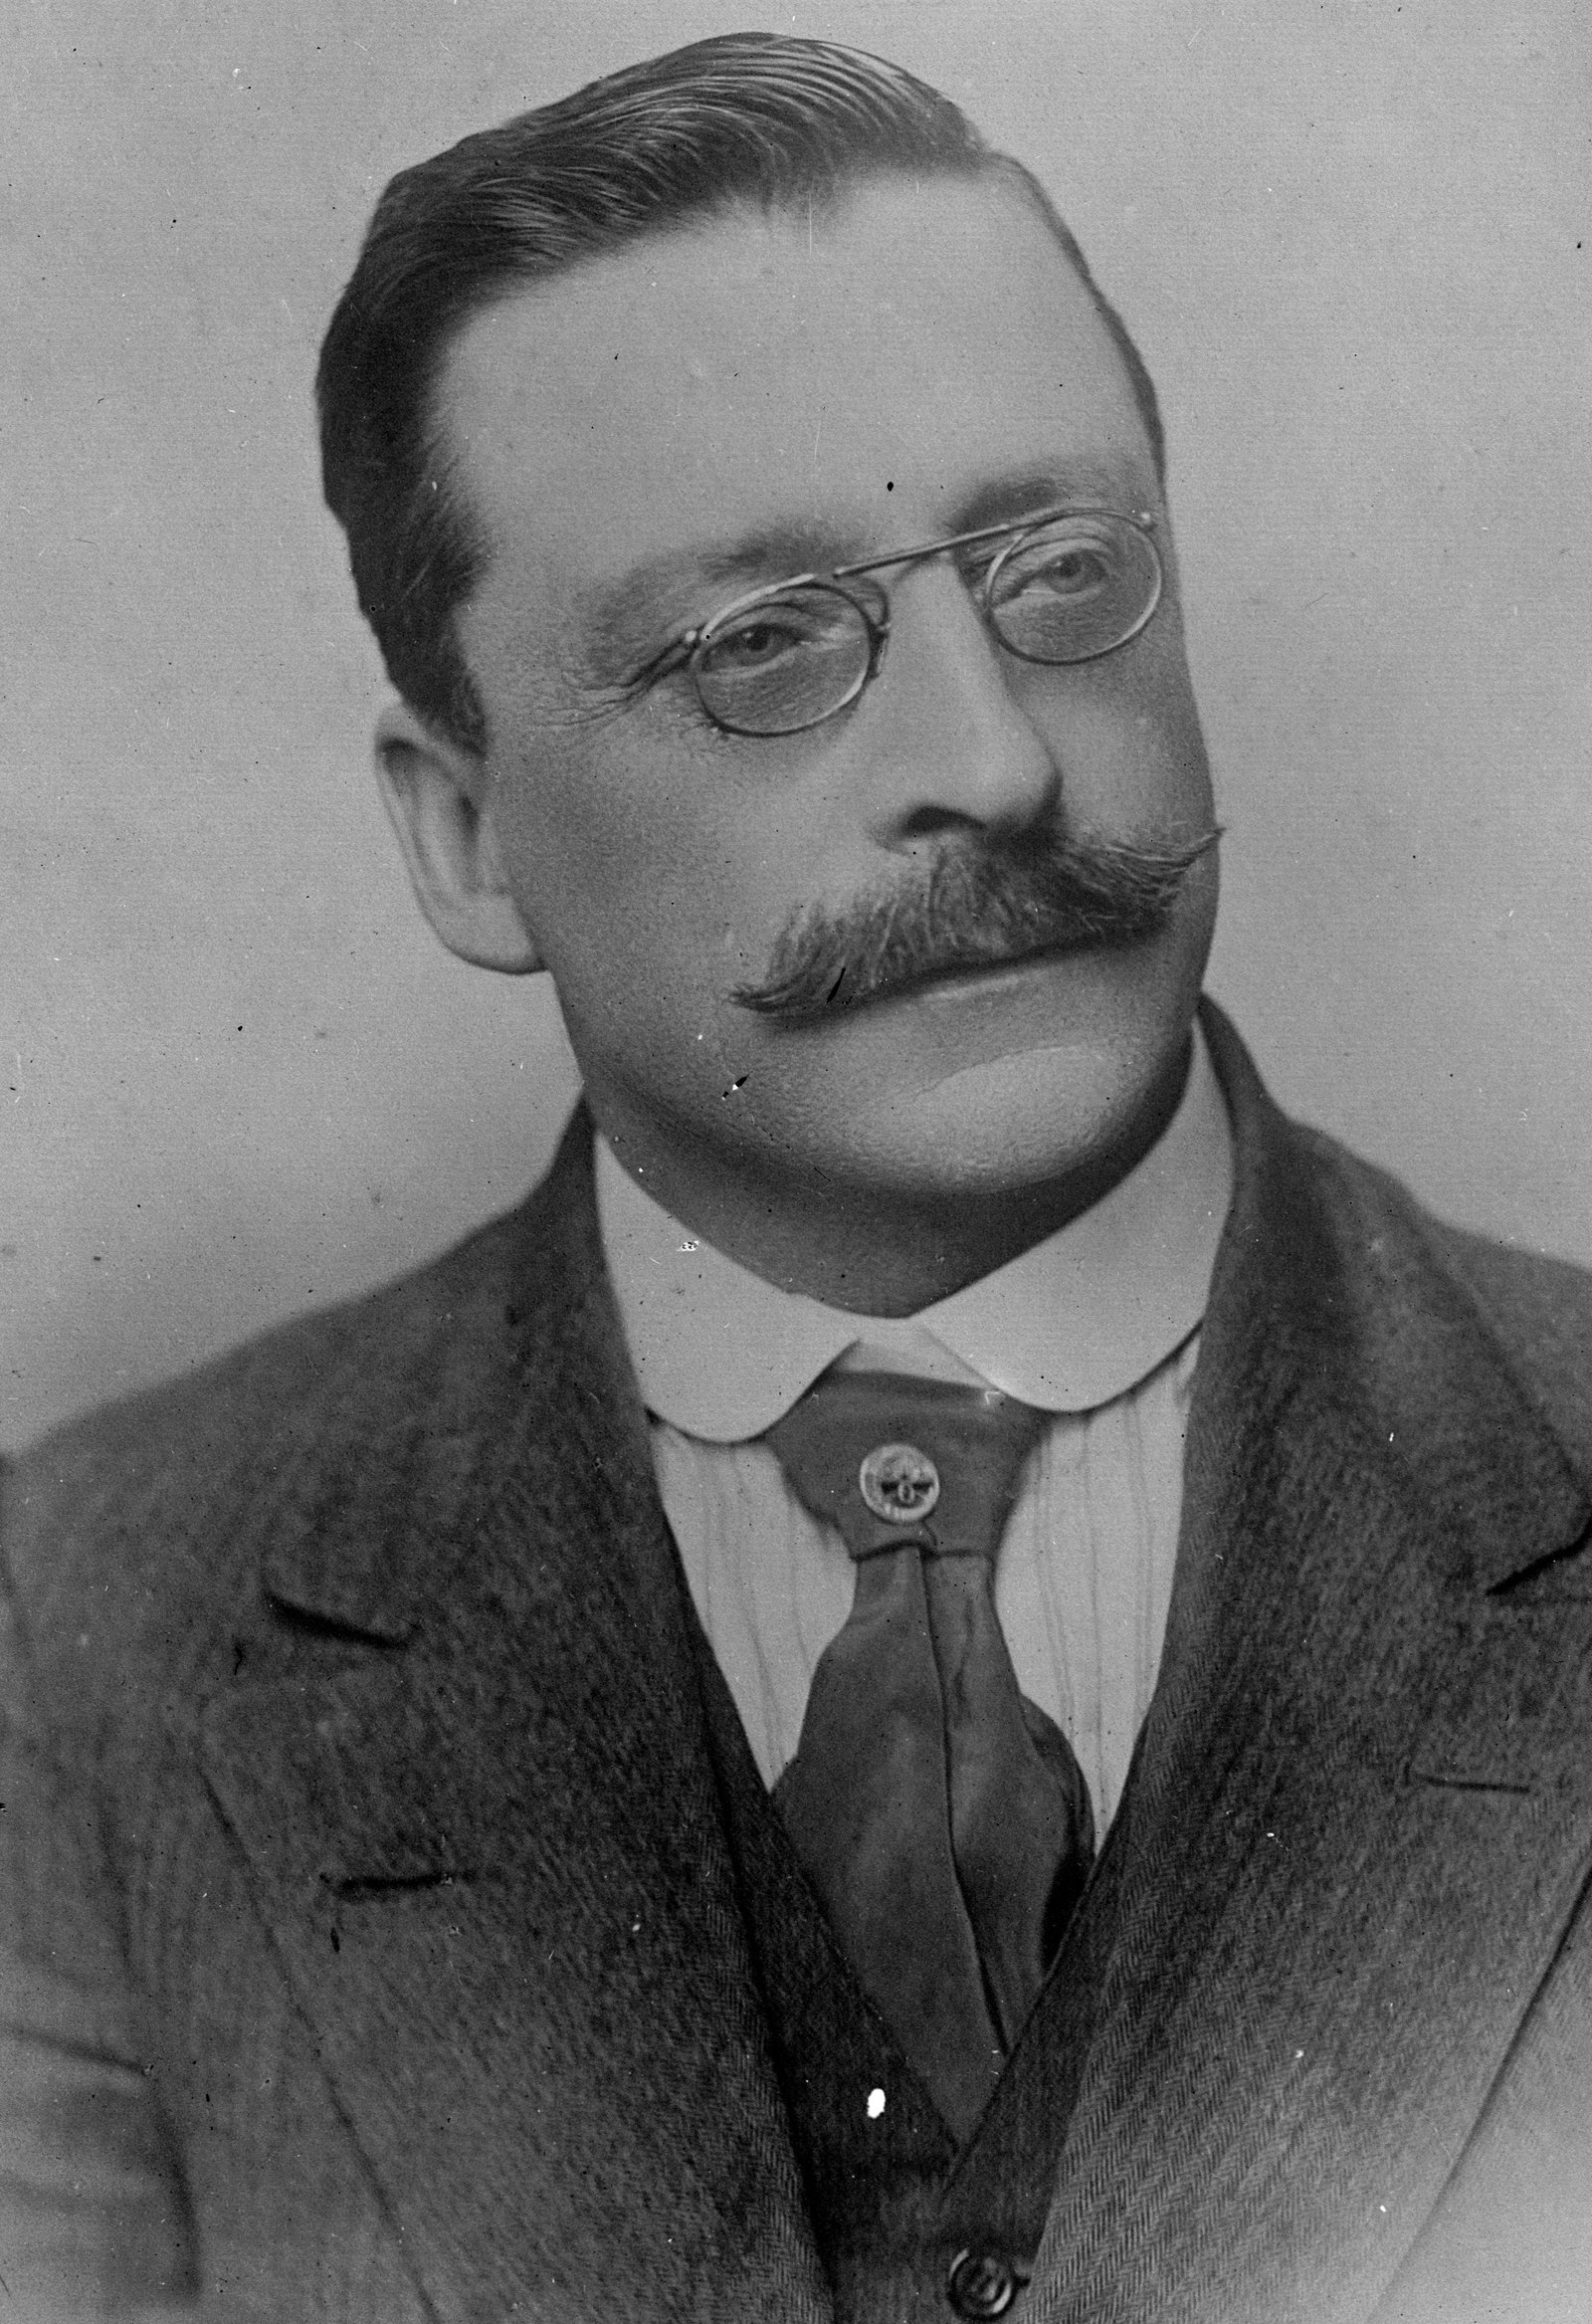 Image - Arthur Griffith: 'The principle I have stood on all my life is the principle of Ireland for the Irish people ... I will not sacrifice my country for a form of government'. Credit: Getty Images